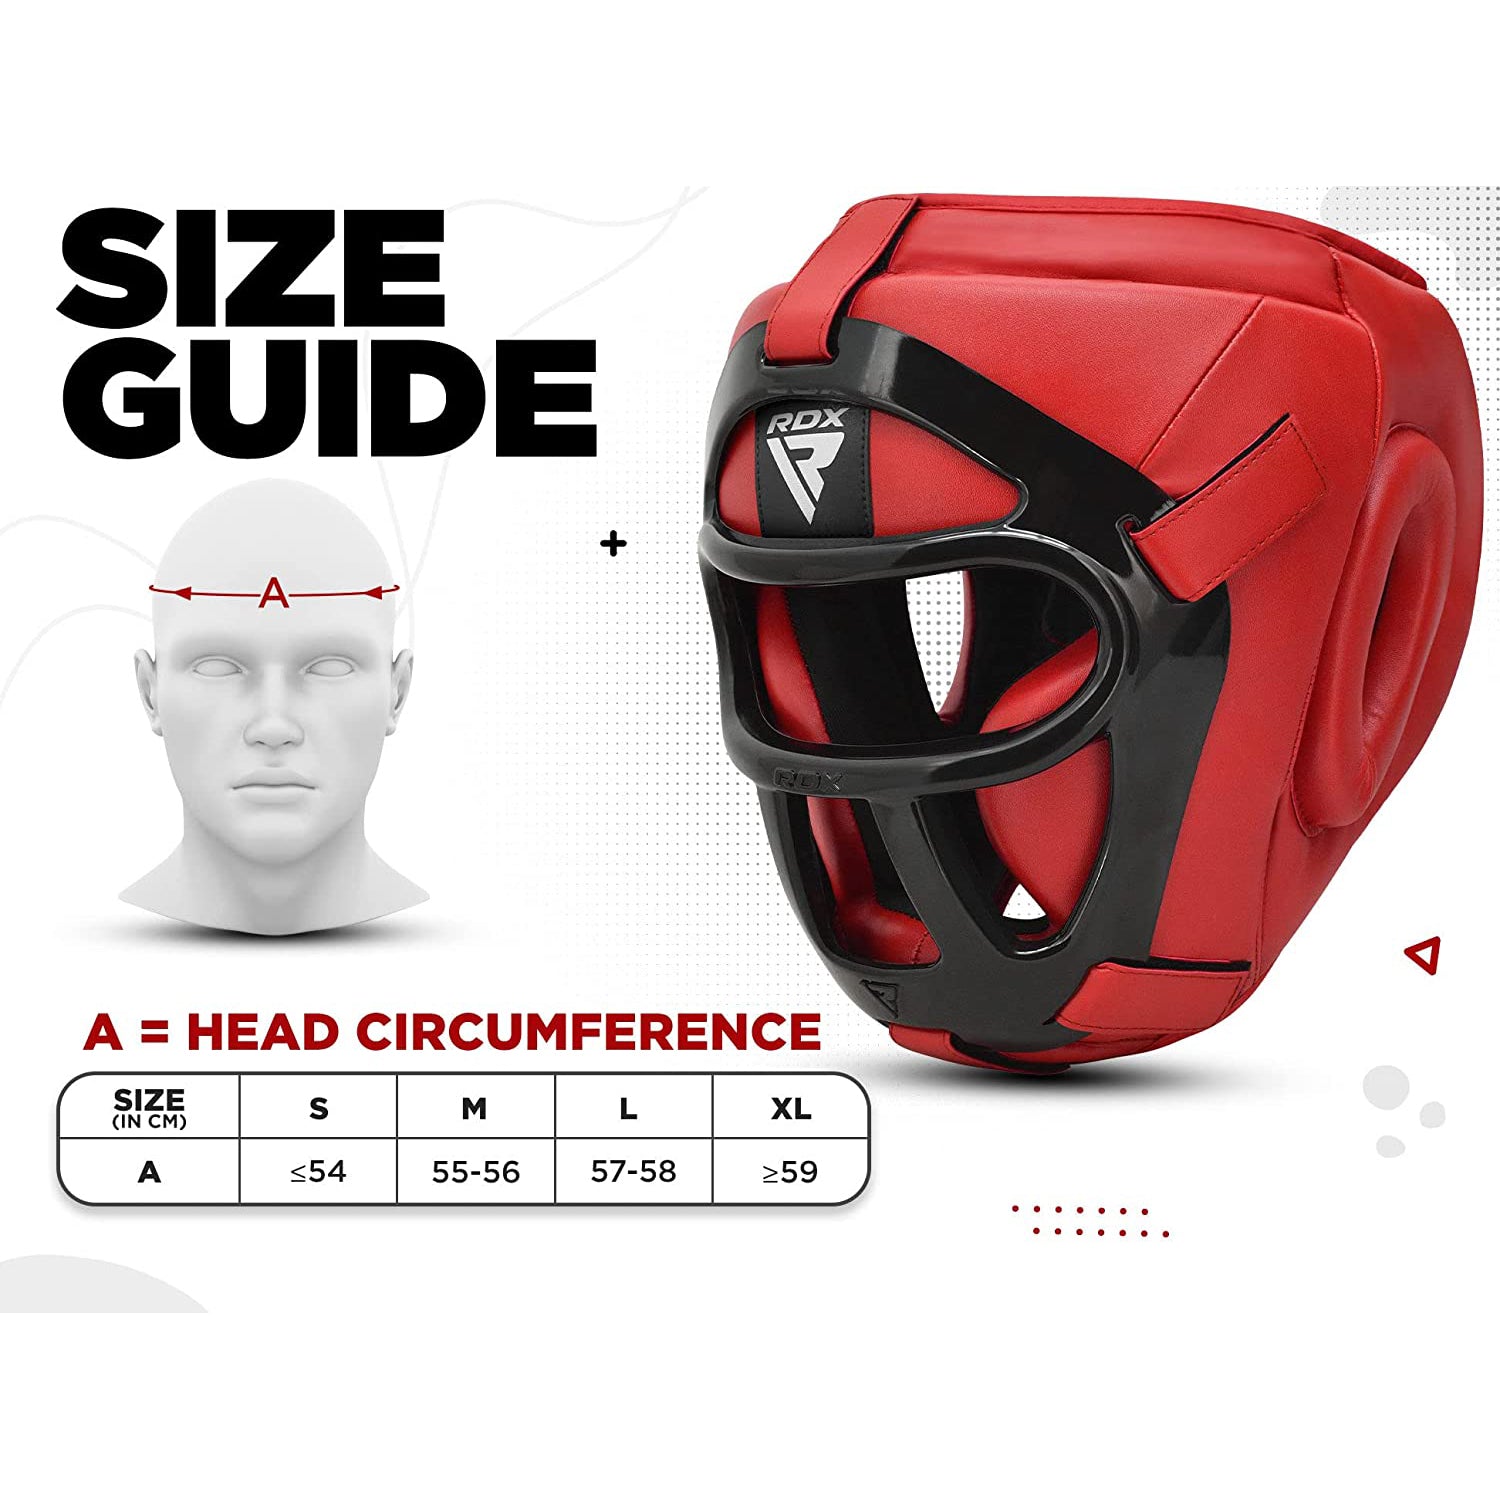 RDX T1 Full Face Protection Headgear for Boxing, MMA, BJJ, Muay Thai, Kickboxing - RED - EXTRA LARGE - Pro-Distributing